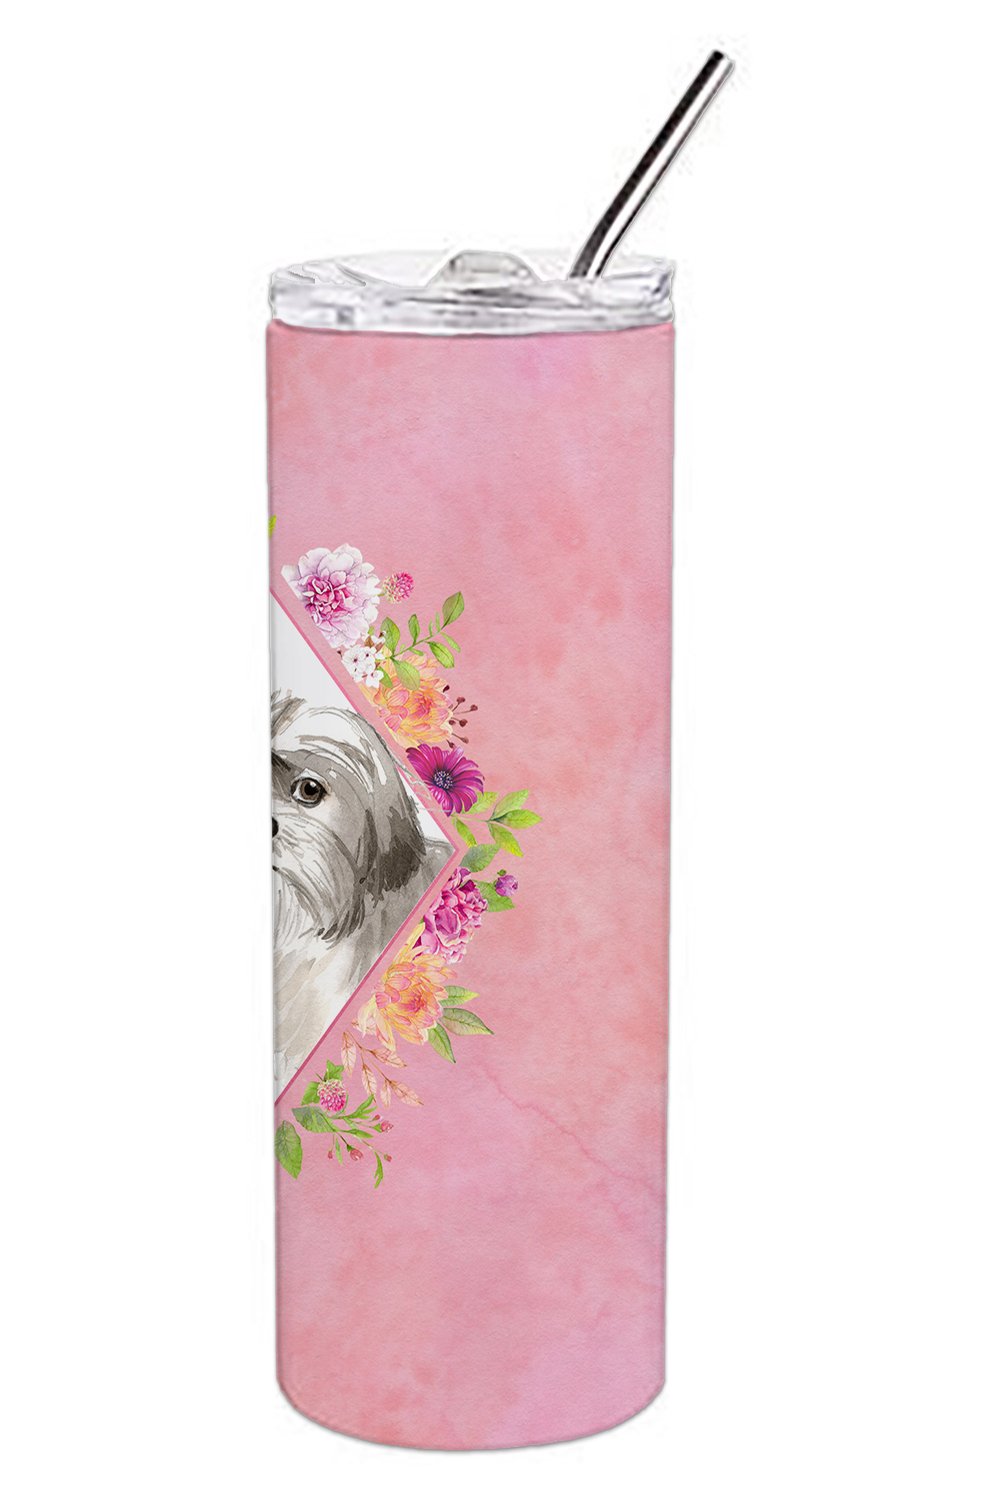 Shih Tzu Puppy Pink Flowers Double Walled Stainless Steel 20 oz Skinny Tumbler CK4211TBL20 by Caroline's Treasures